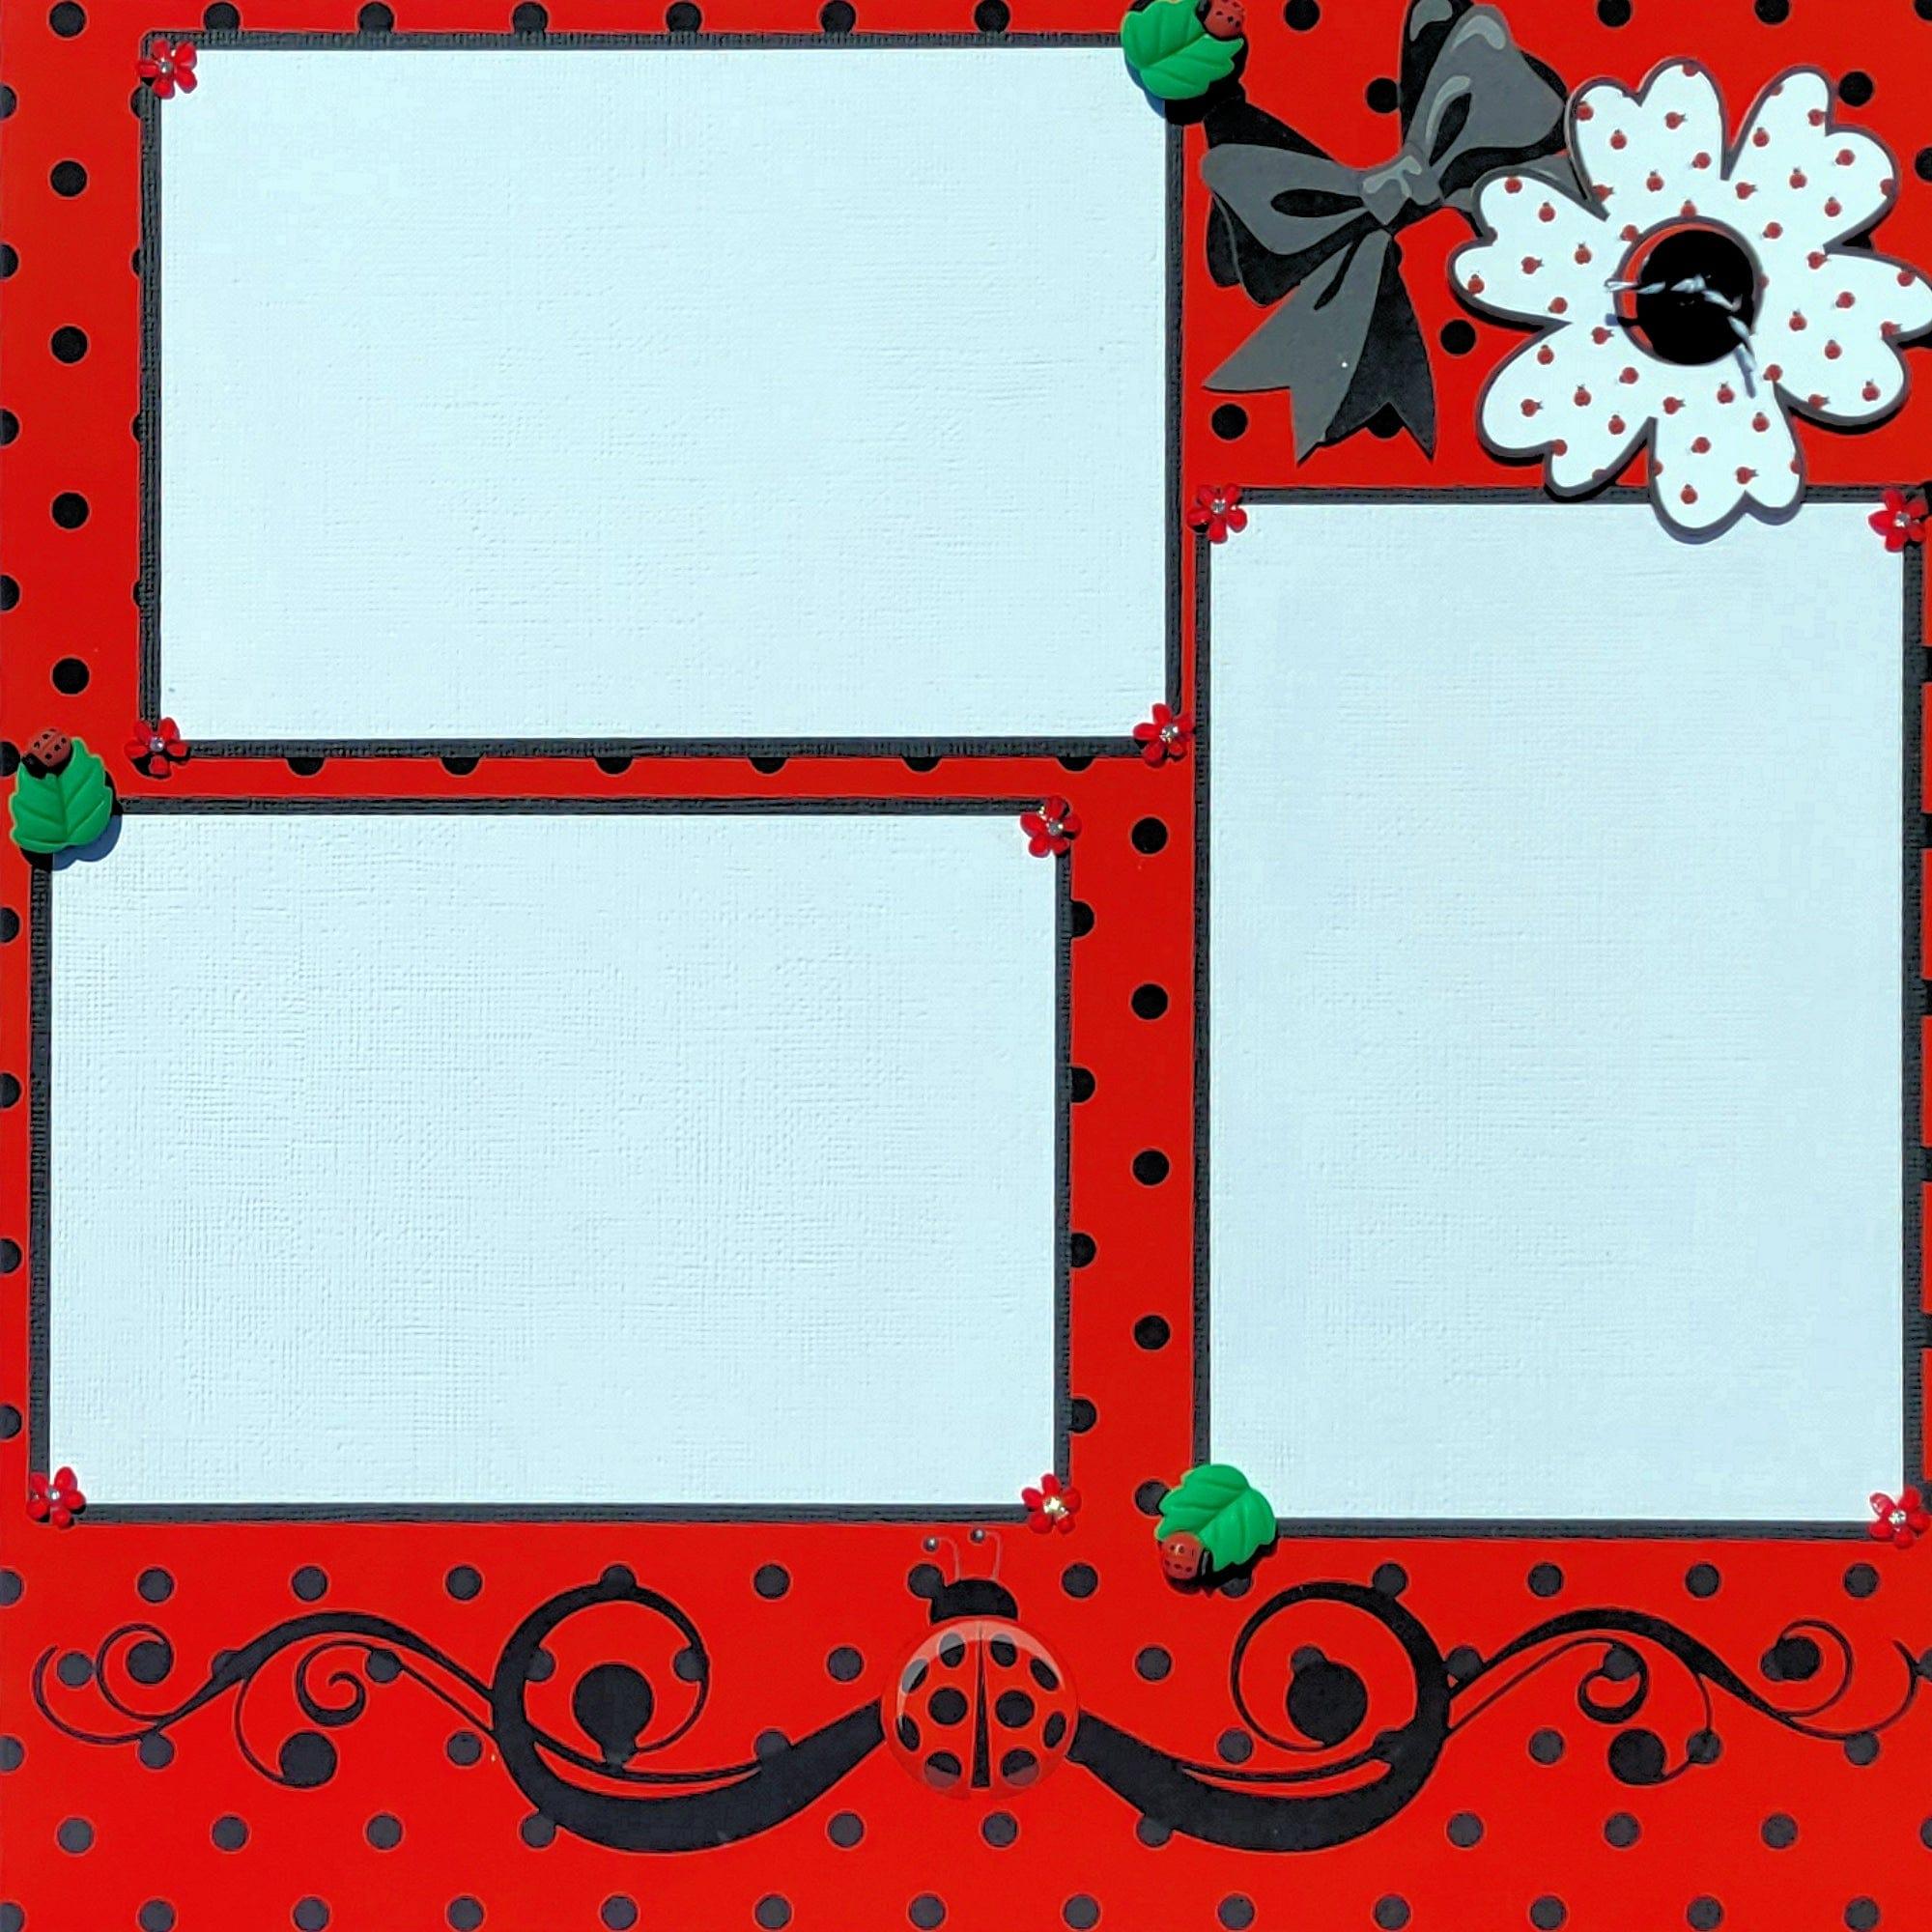 Ladybug Love Collection Little Lady (2) - 12 x 12 Pages, Fully-Assembled & Hand-Embellished 3D Scrapbook Premade by SSC Design